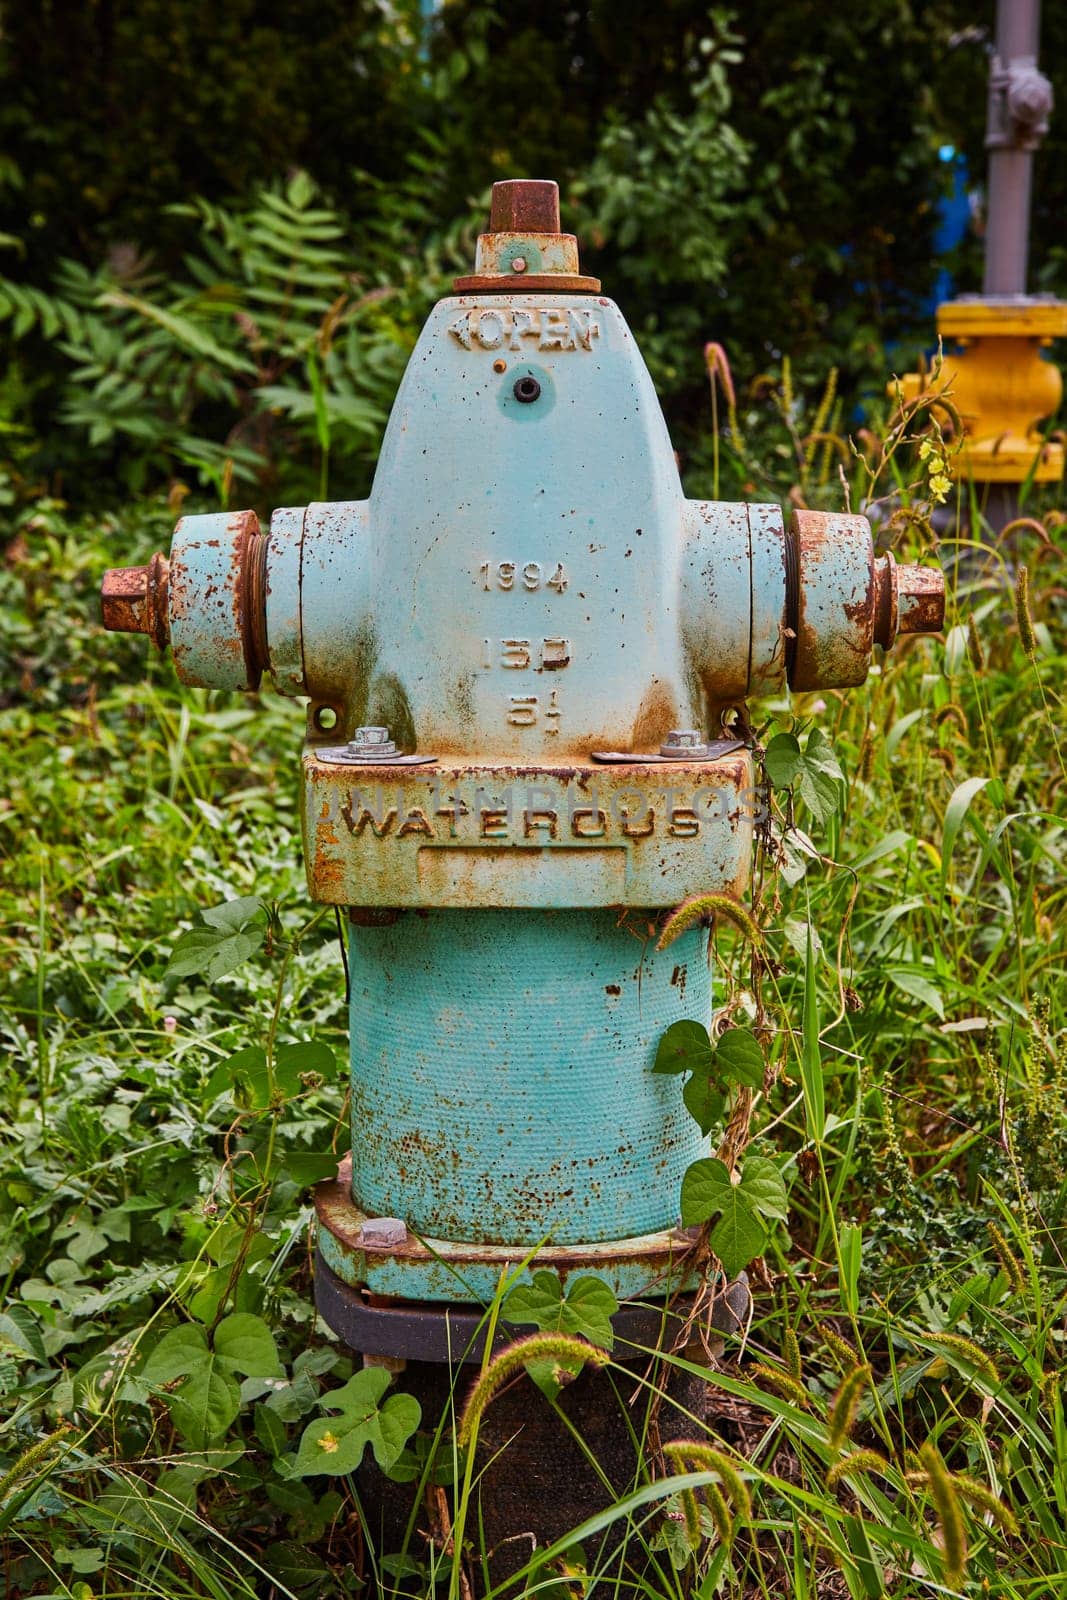 Vintage Blue Fire Hydrant in Overgrown Greenery, Weathered Urban Scene by njproductions